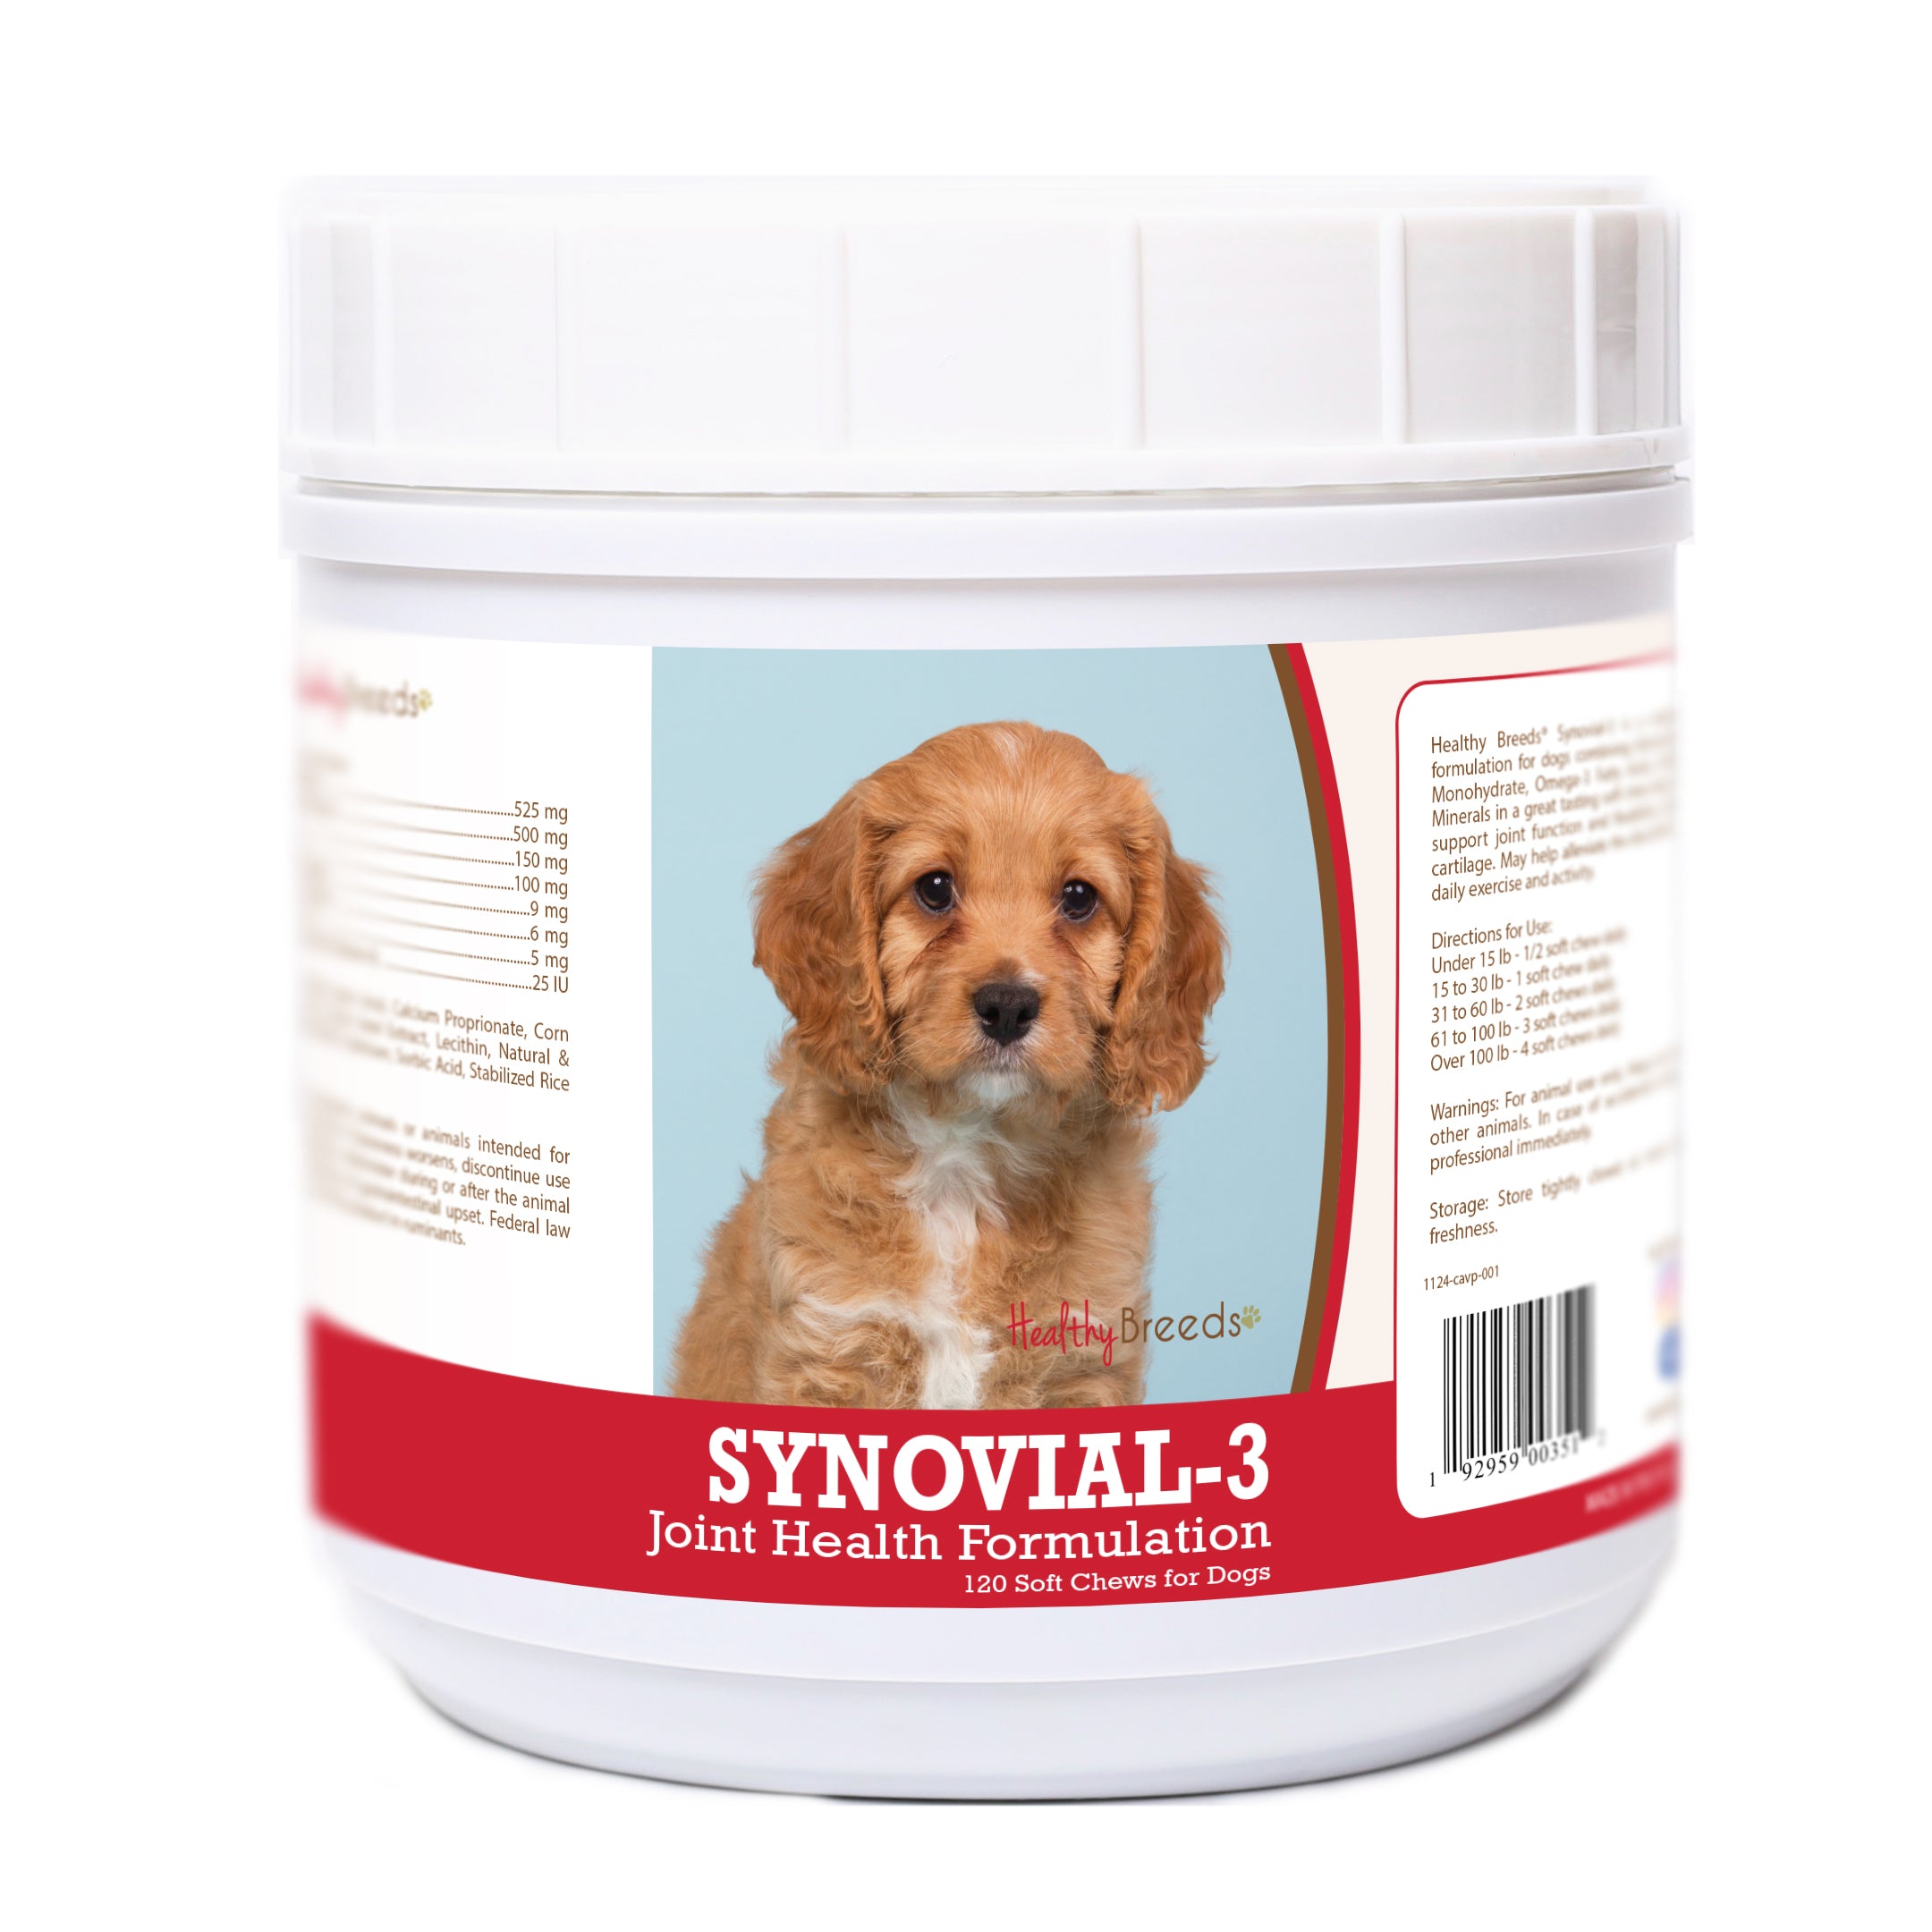 Cavapoo Synovial-3 Joint Health Formulation Soft Chews 120 Count